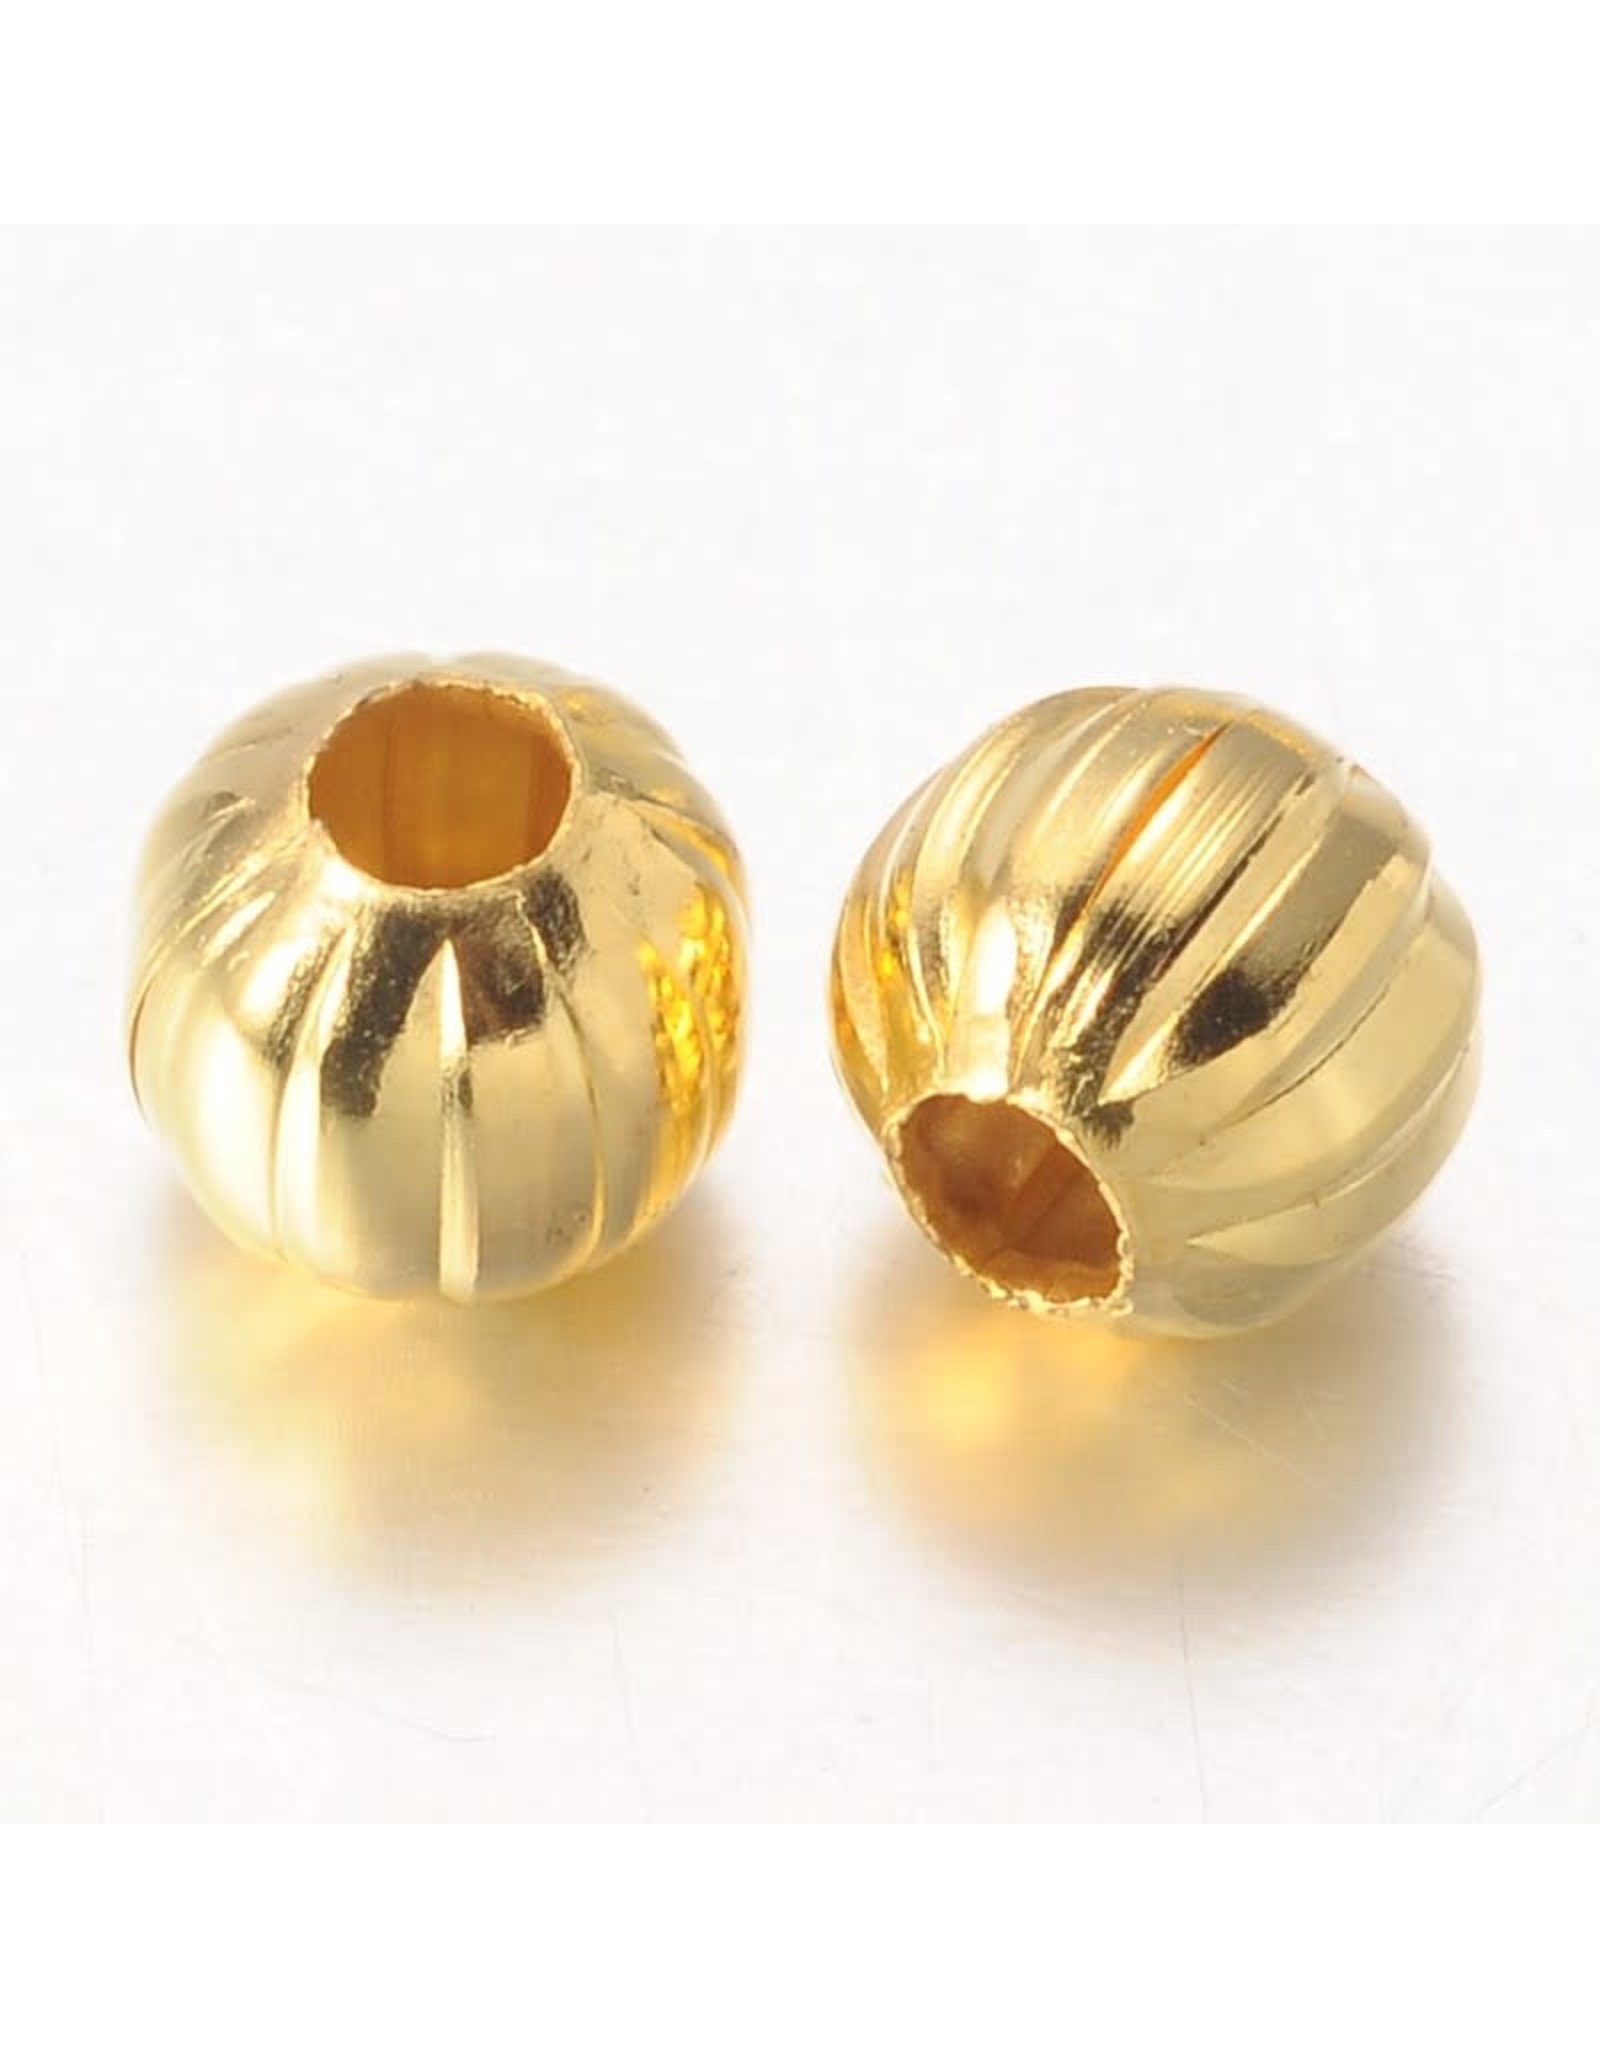 Round Gold Fluted Spacer Bead  6mm  x100